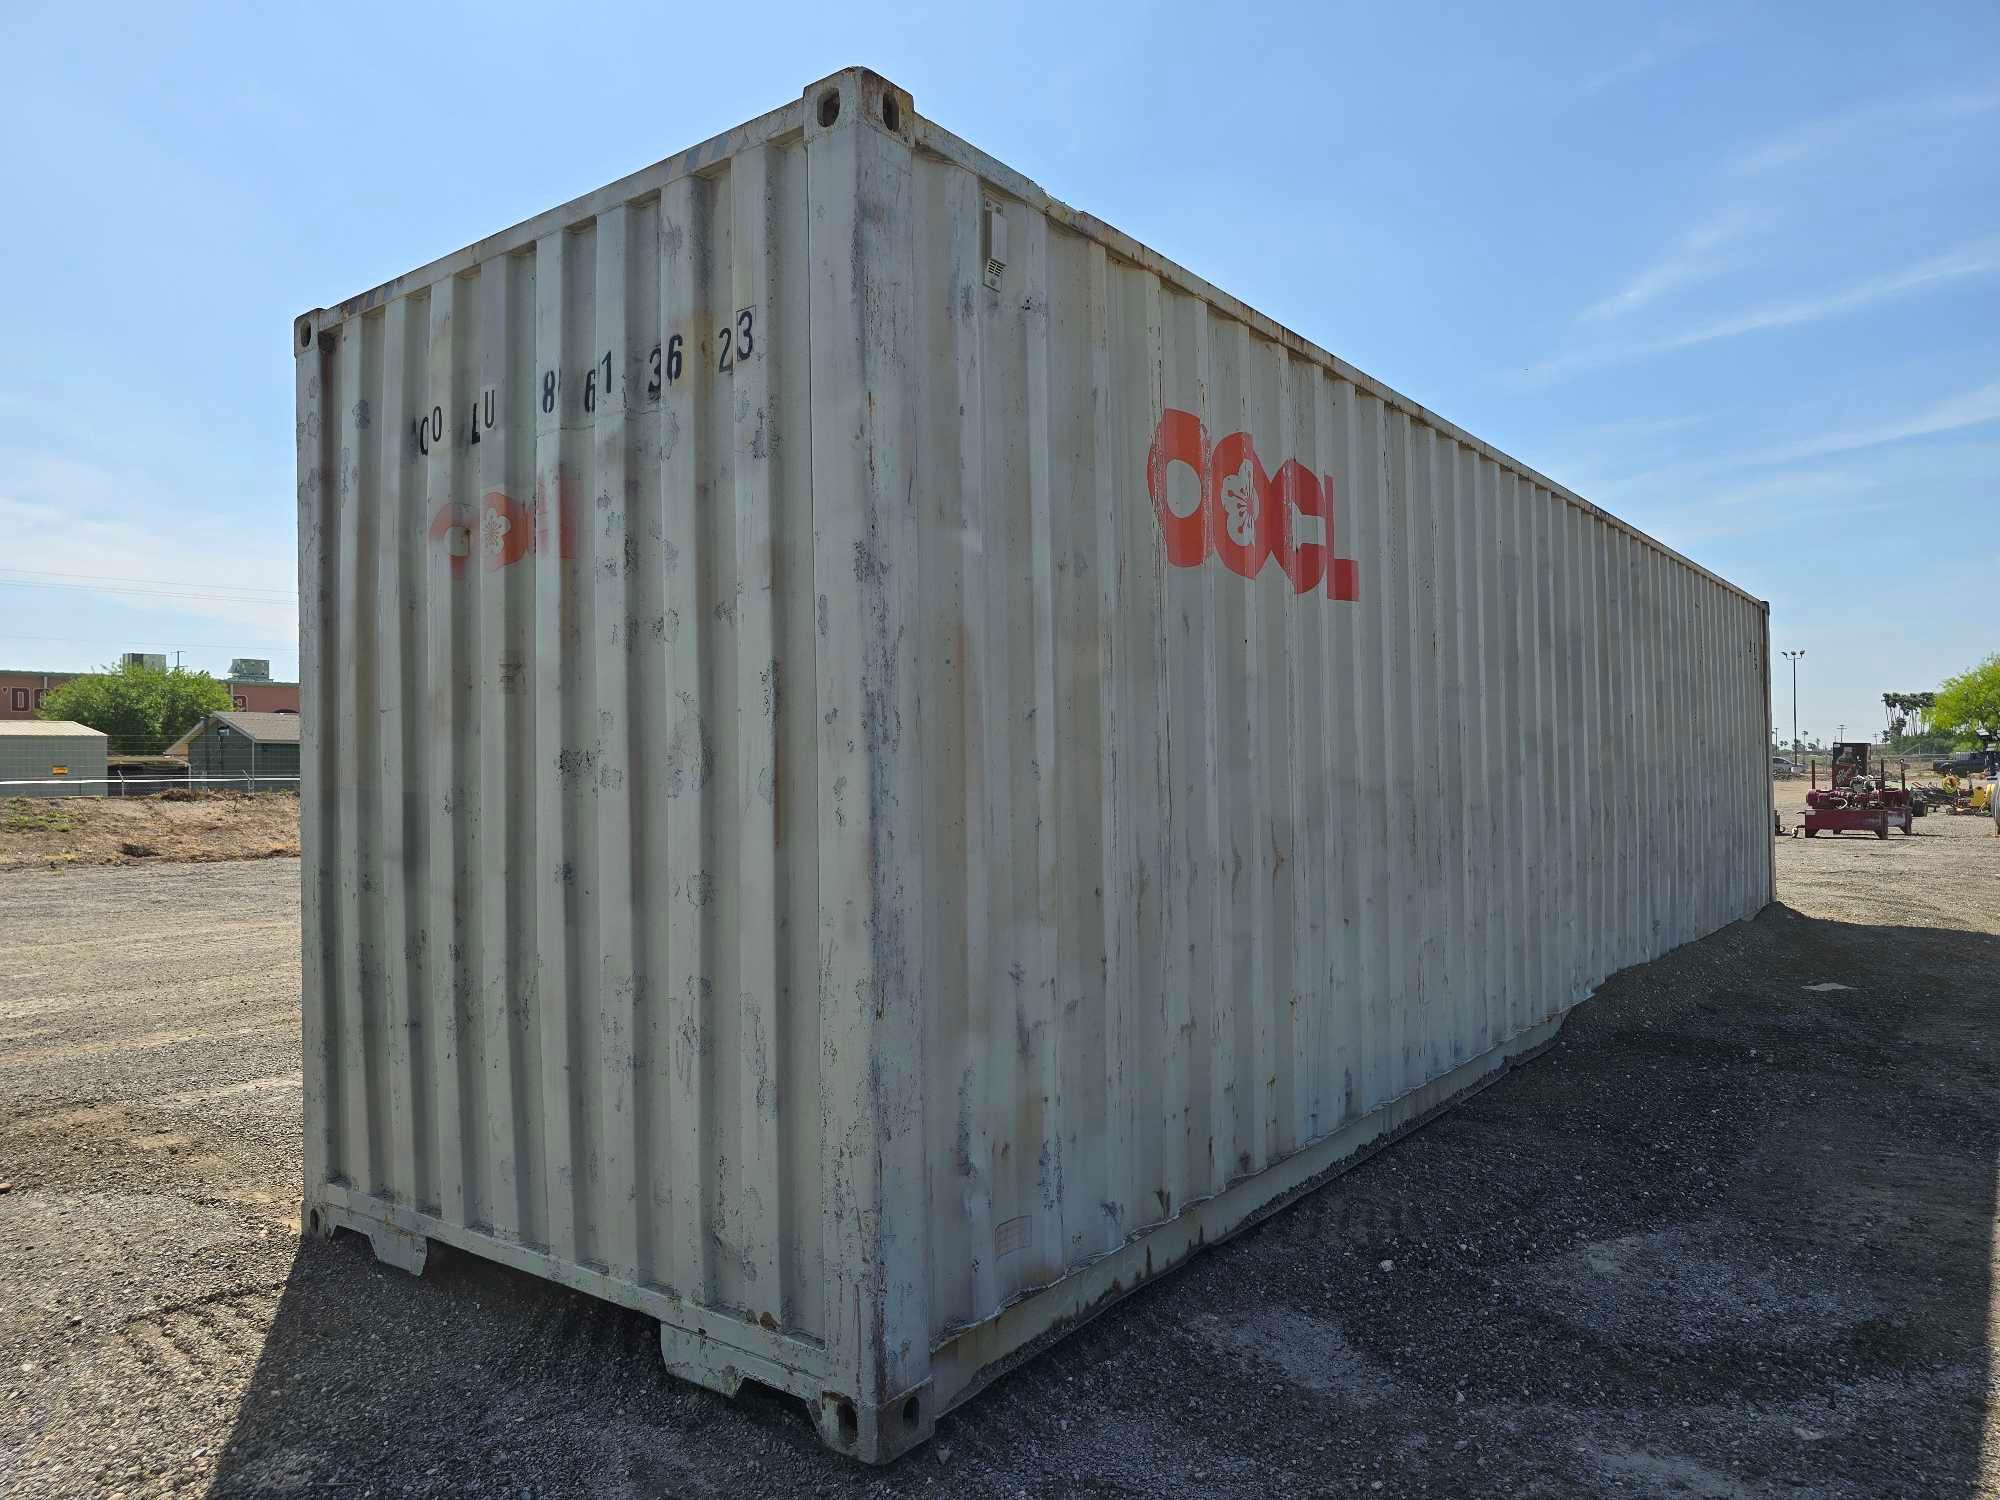 40 Foot High Cube Container